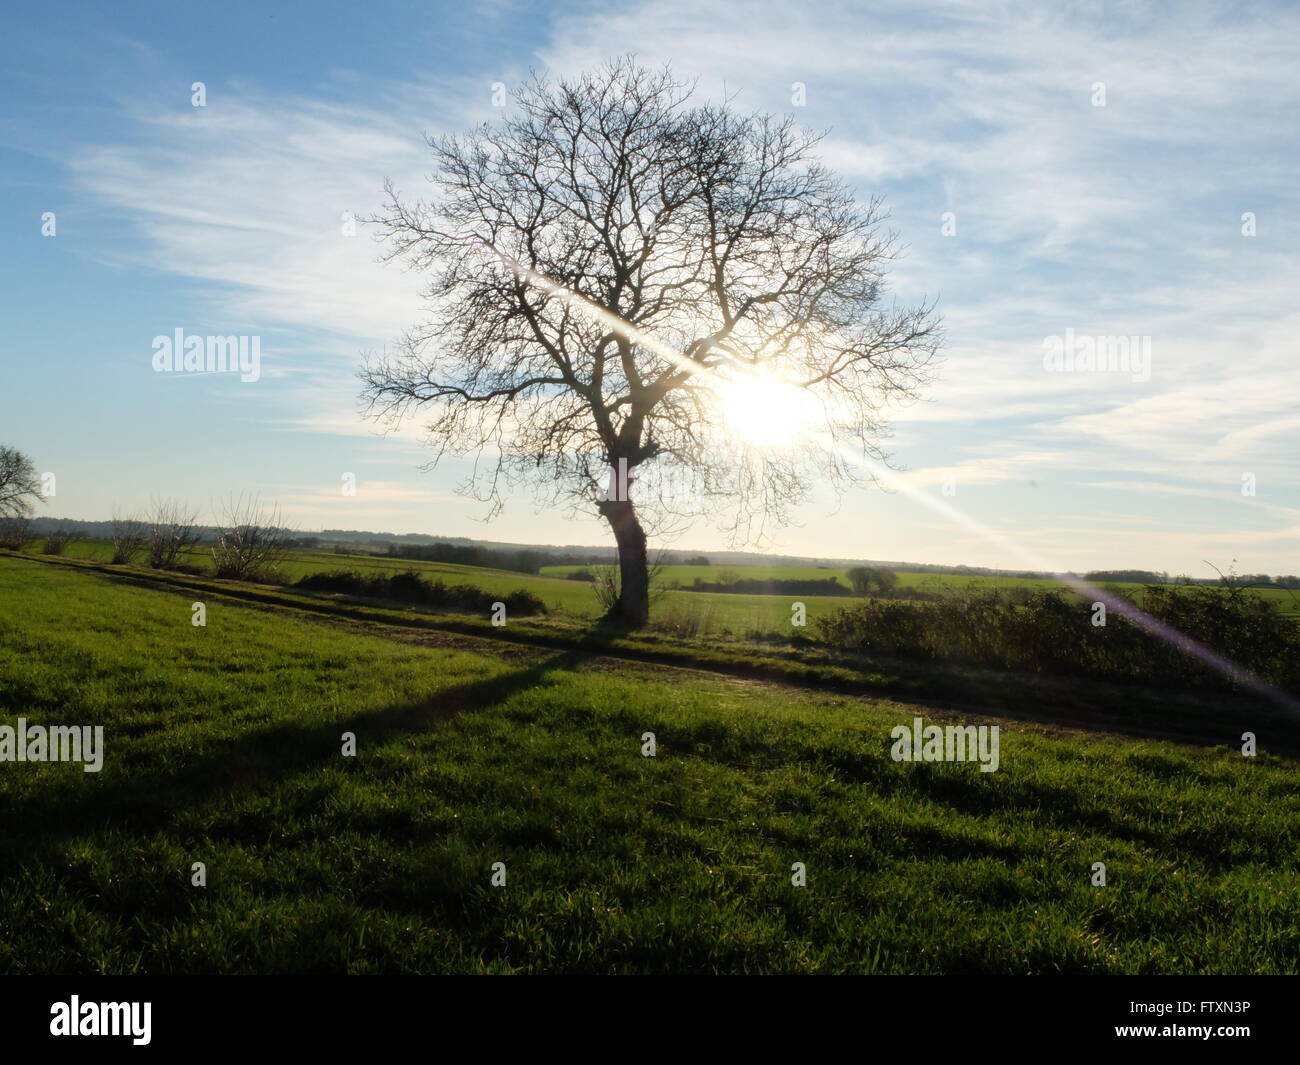 Lone tree in field, Niort, Deux-Sevres, France Stock Photo